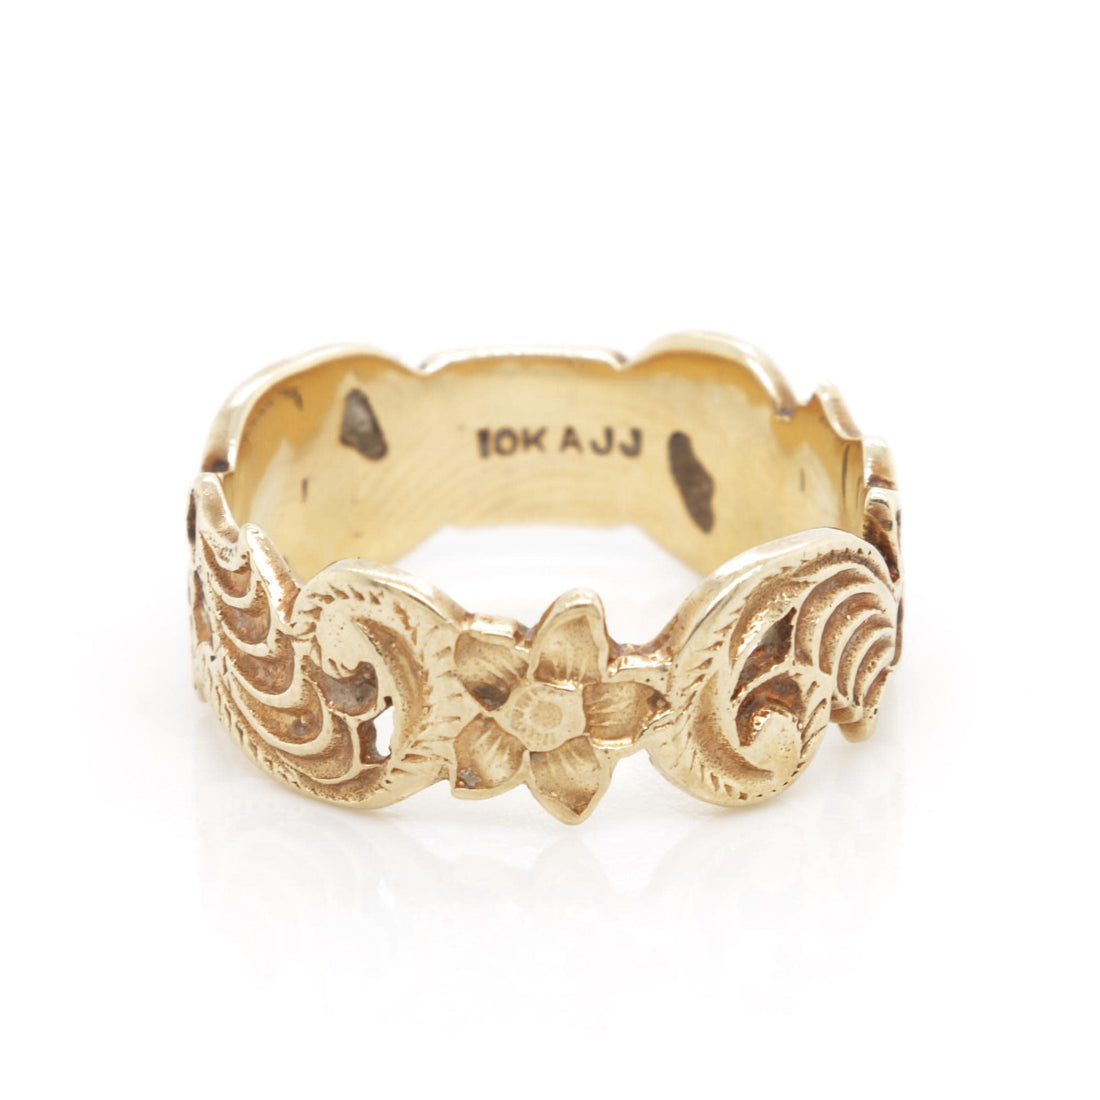 10k Yellow Gold Flower Patterned Ring